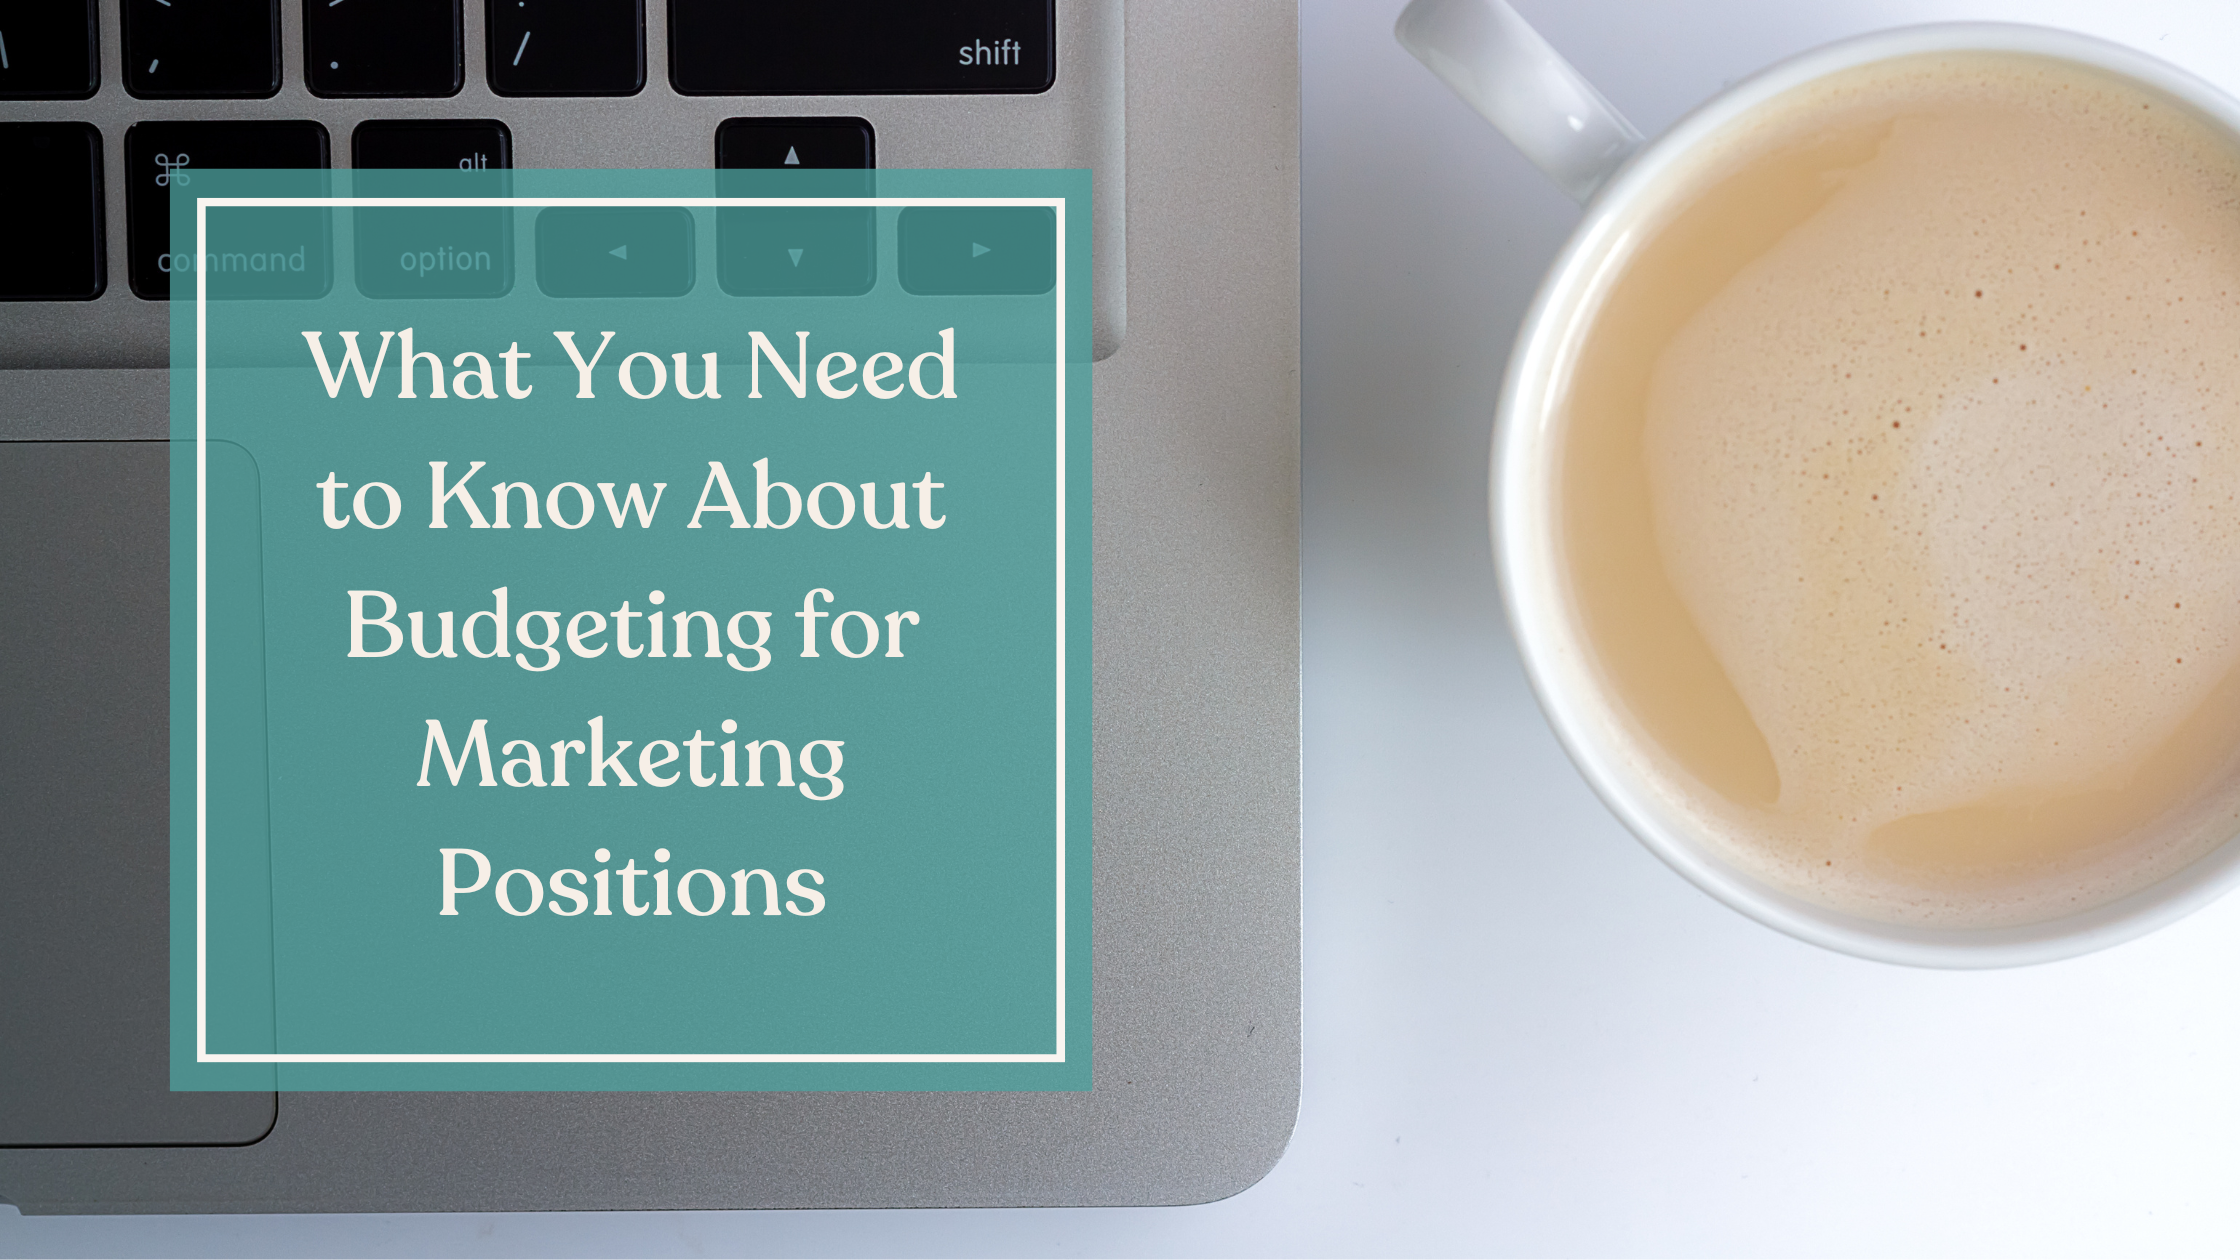 What You Need to Know About Budgeting for Marketing Positions